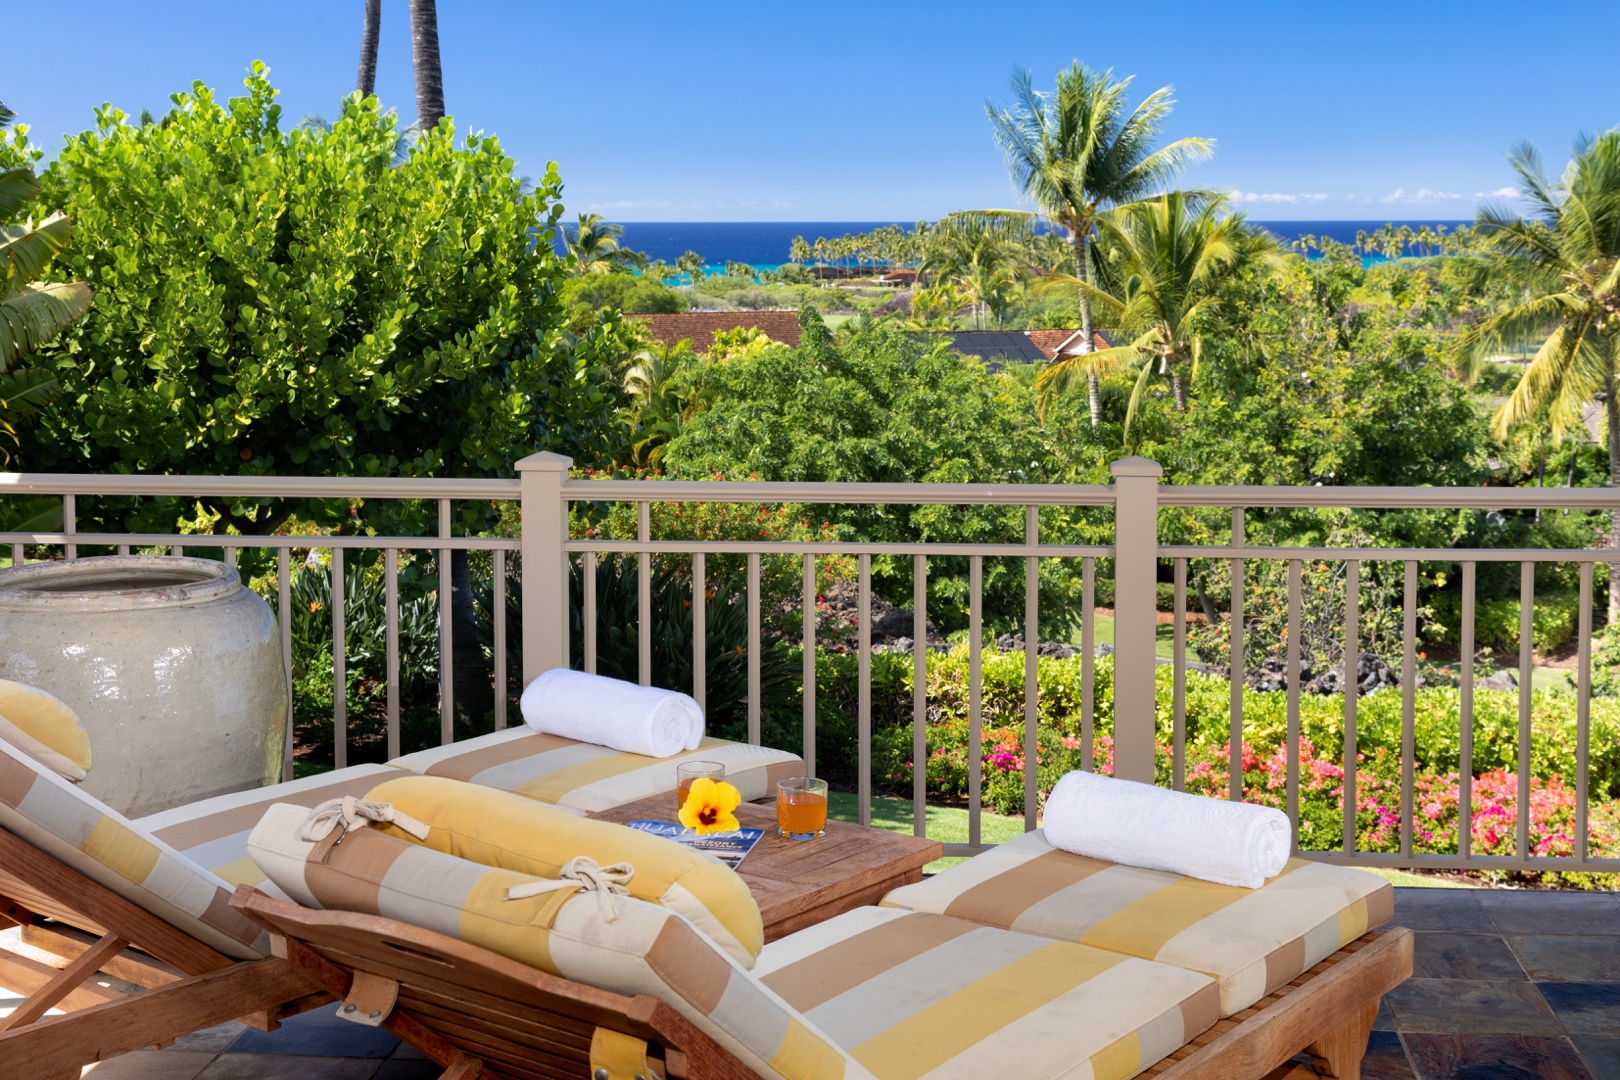 Kailua Kona Vacation Rentals, 3BD Ke Alaula Villa (210A) at Four Seasons Resort at Hualalai - Periodic views of the humpback whale migrations during winter (Dec-Apr) are on offer from your private lanai.